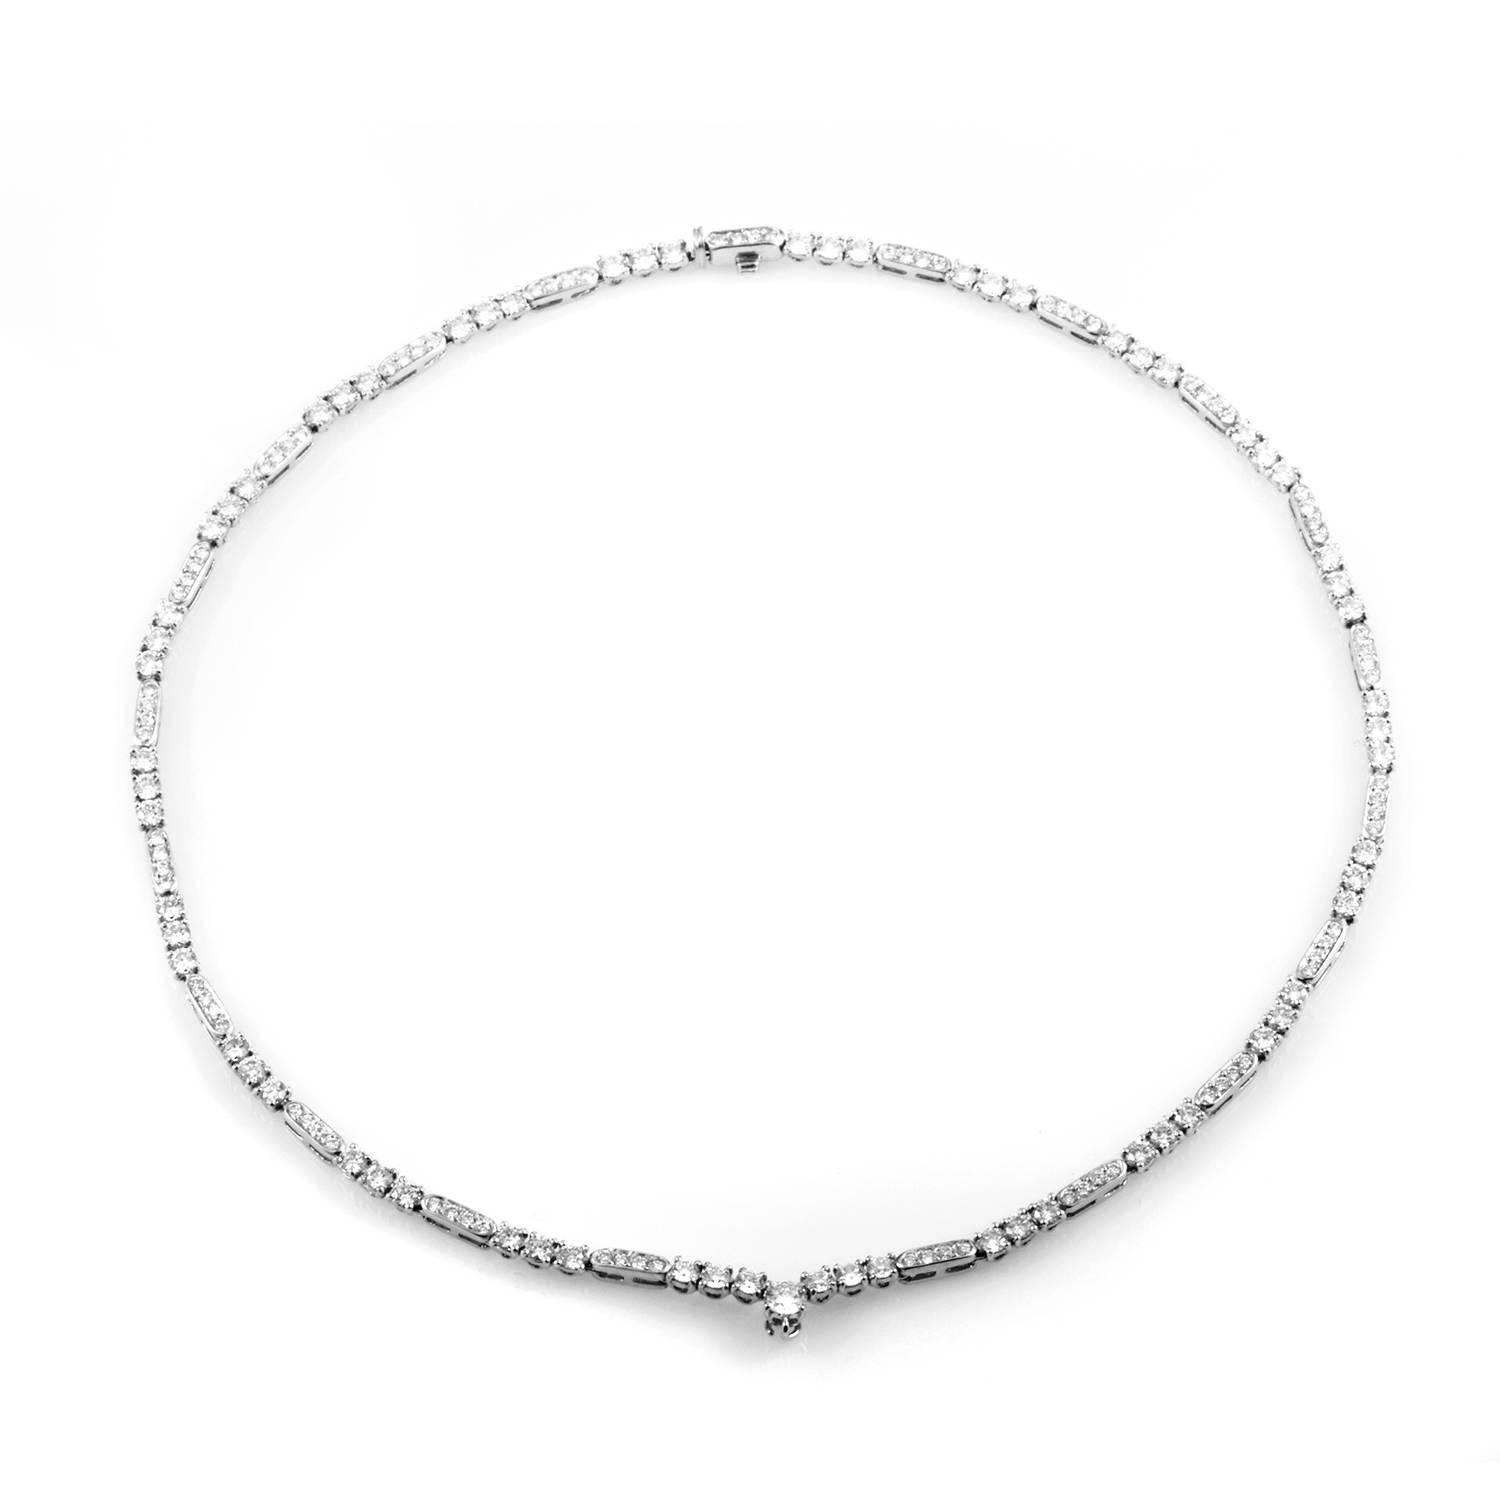 Understated prestige and subtle elegance at their very finest, this spellbinding necklace from Graff boasts a minimalistic and intriguing design made of luxurious platinum and adorned with a neat and scintillating setting of diamonds weighing in